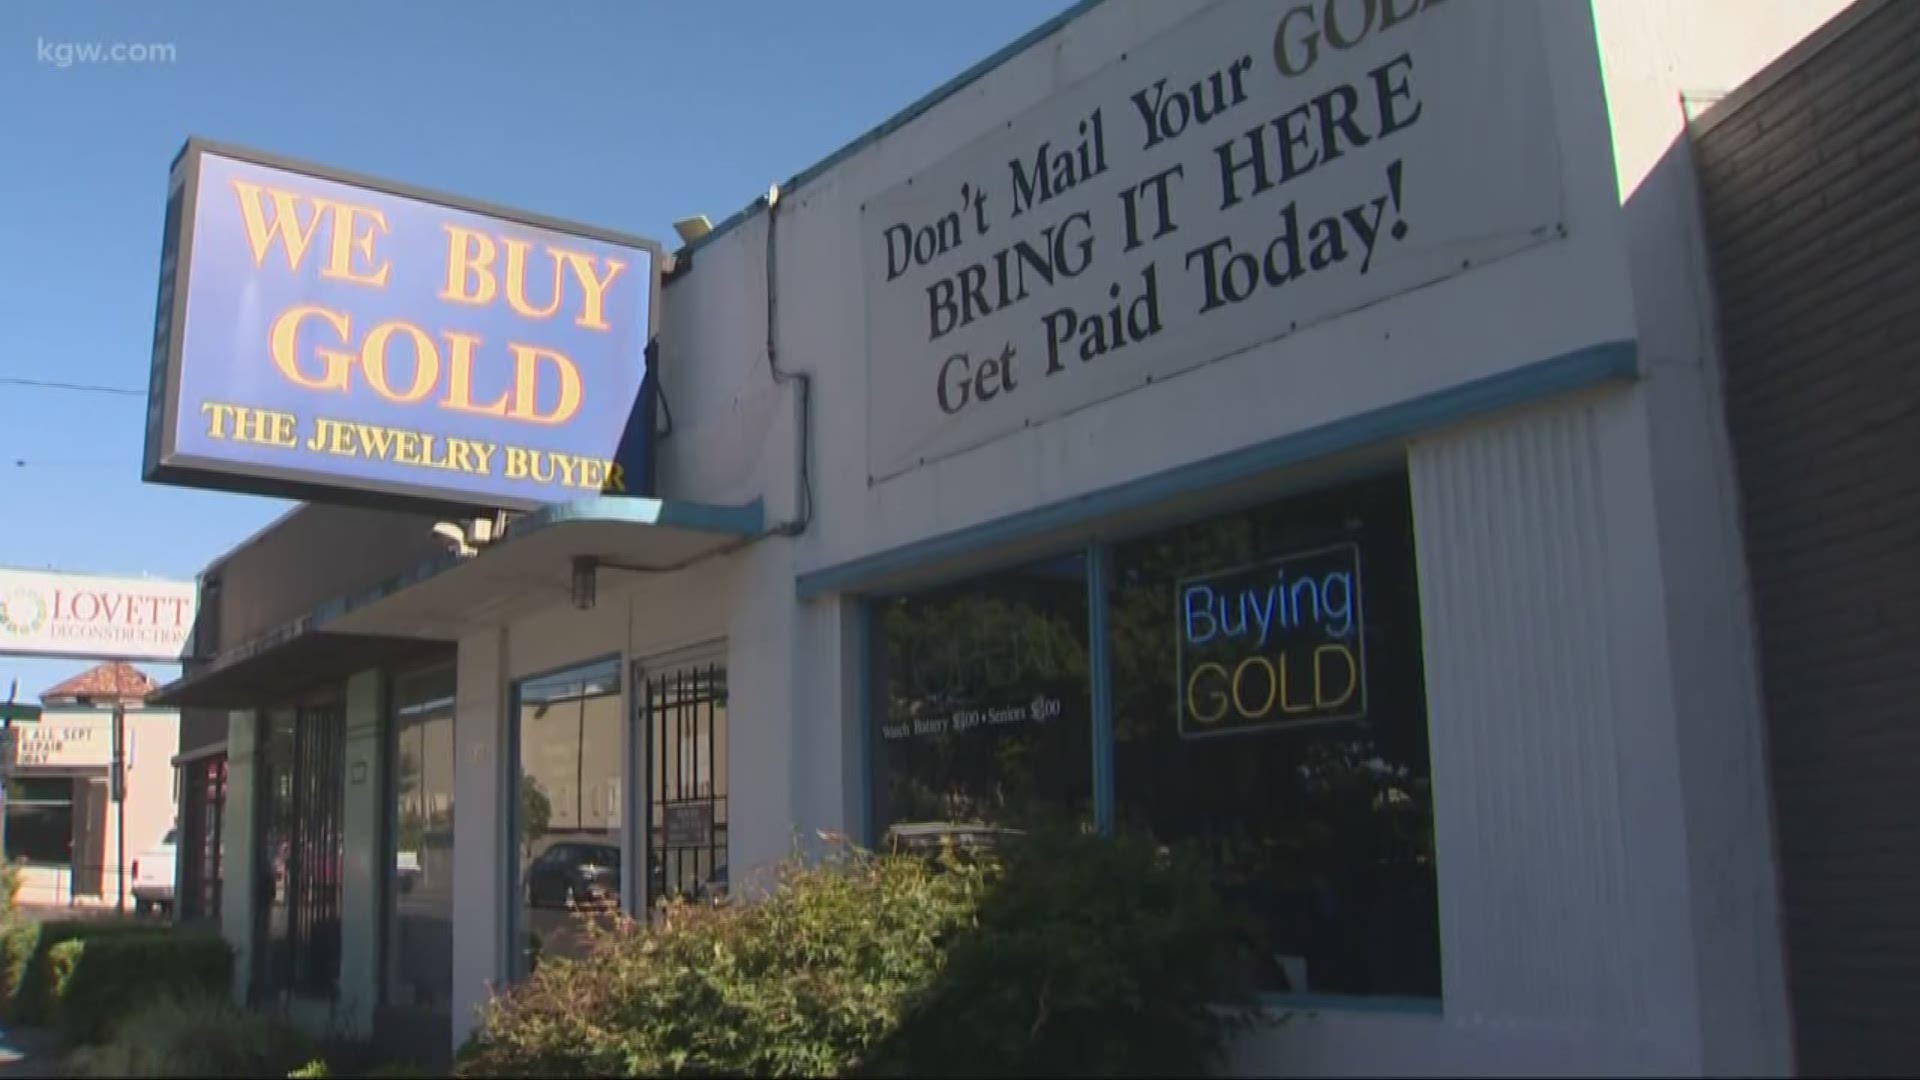 An armed man robbed a Portland jewelry store and hit an employee with a hammer, police say.